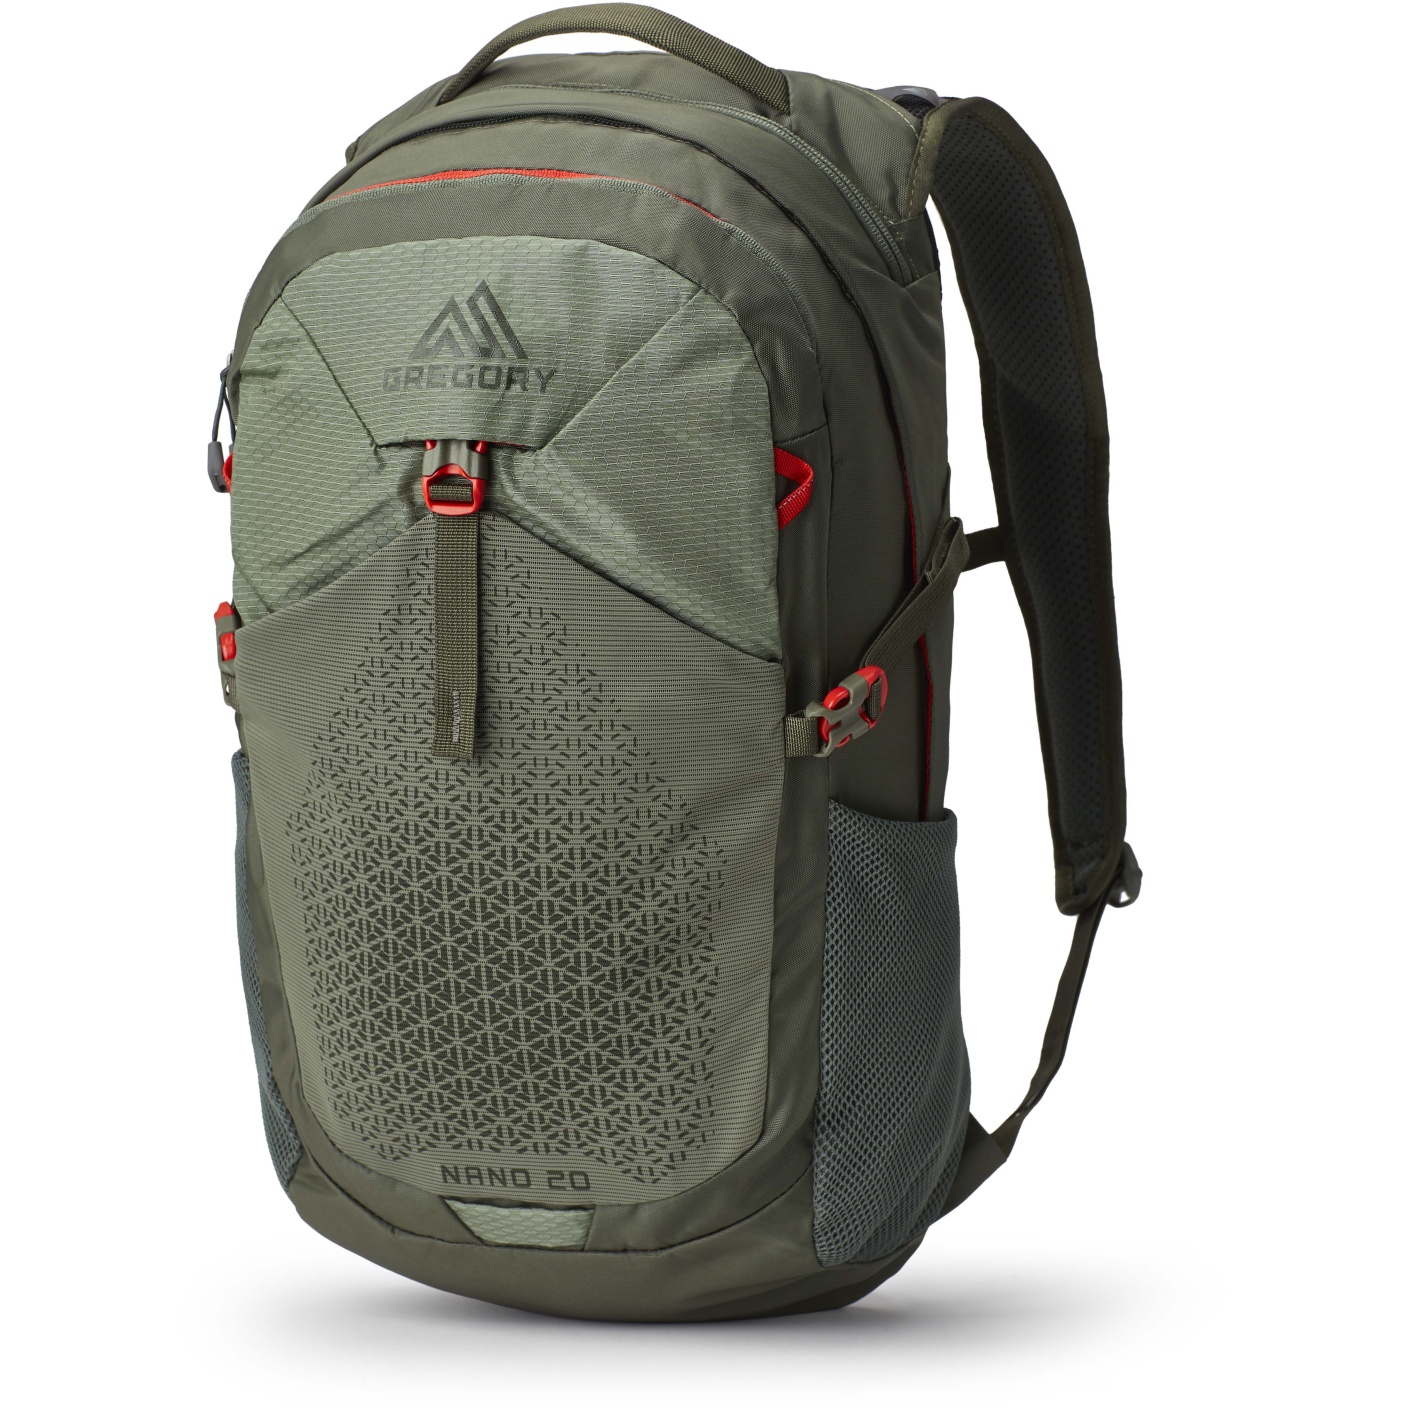 Picture of Gregory Nano 20 Backpack - Blaze Green